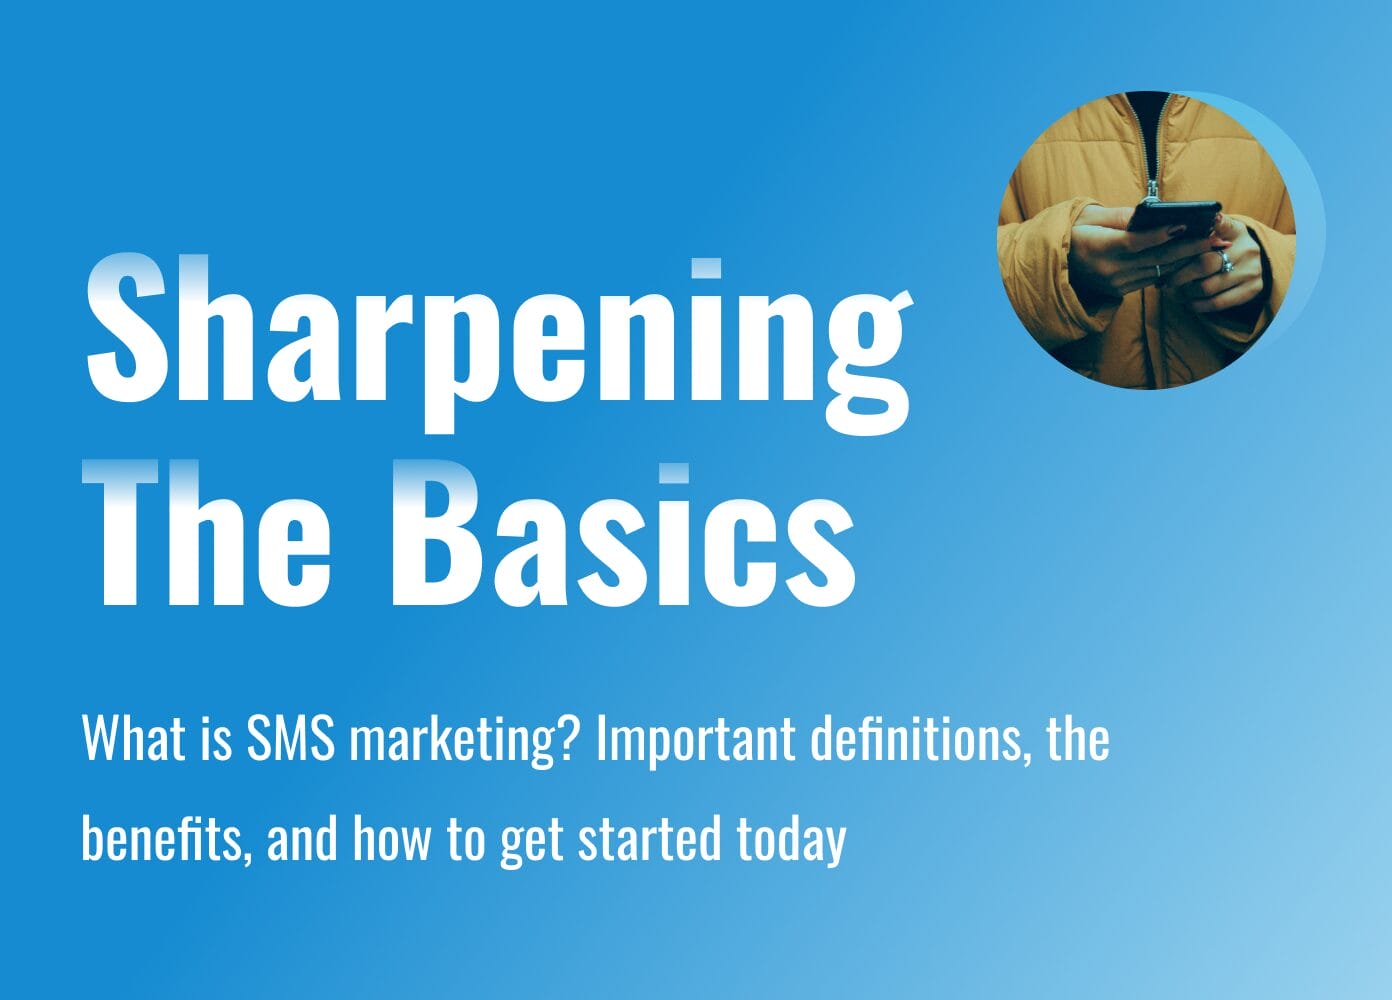 What is SMS Marketing? Important Definitions, Benefits, and How to Get Started